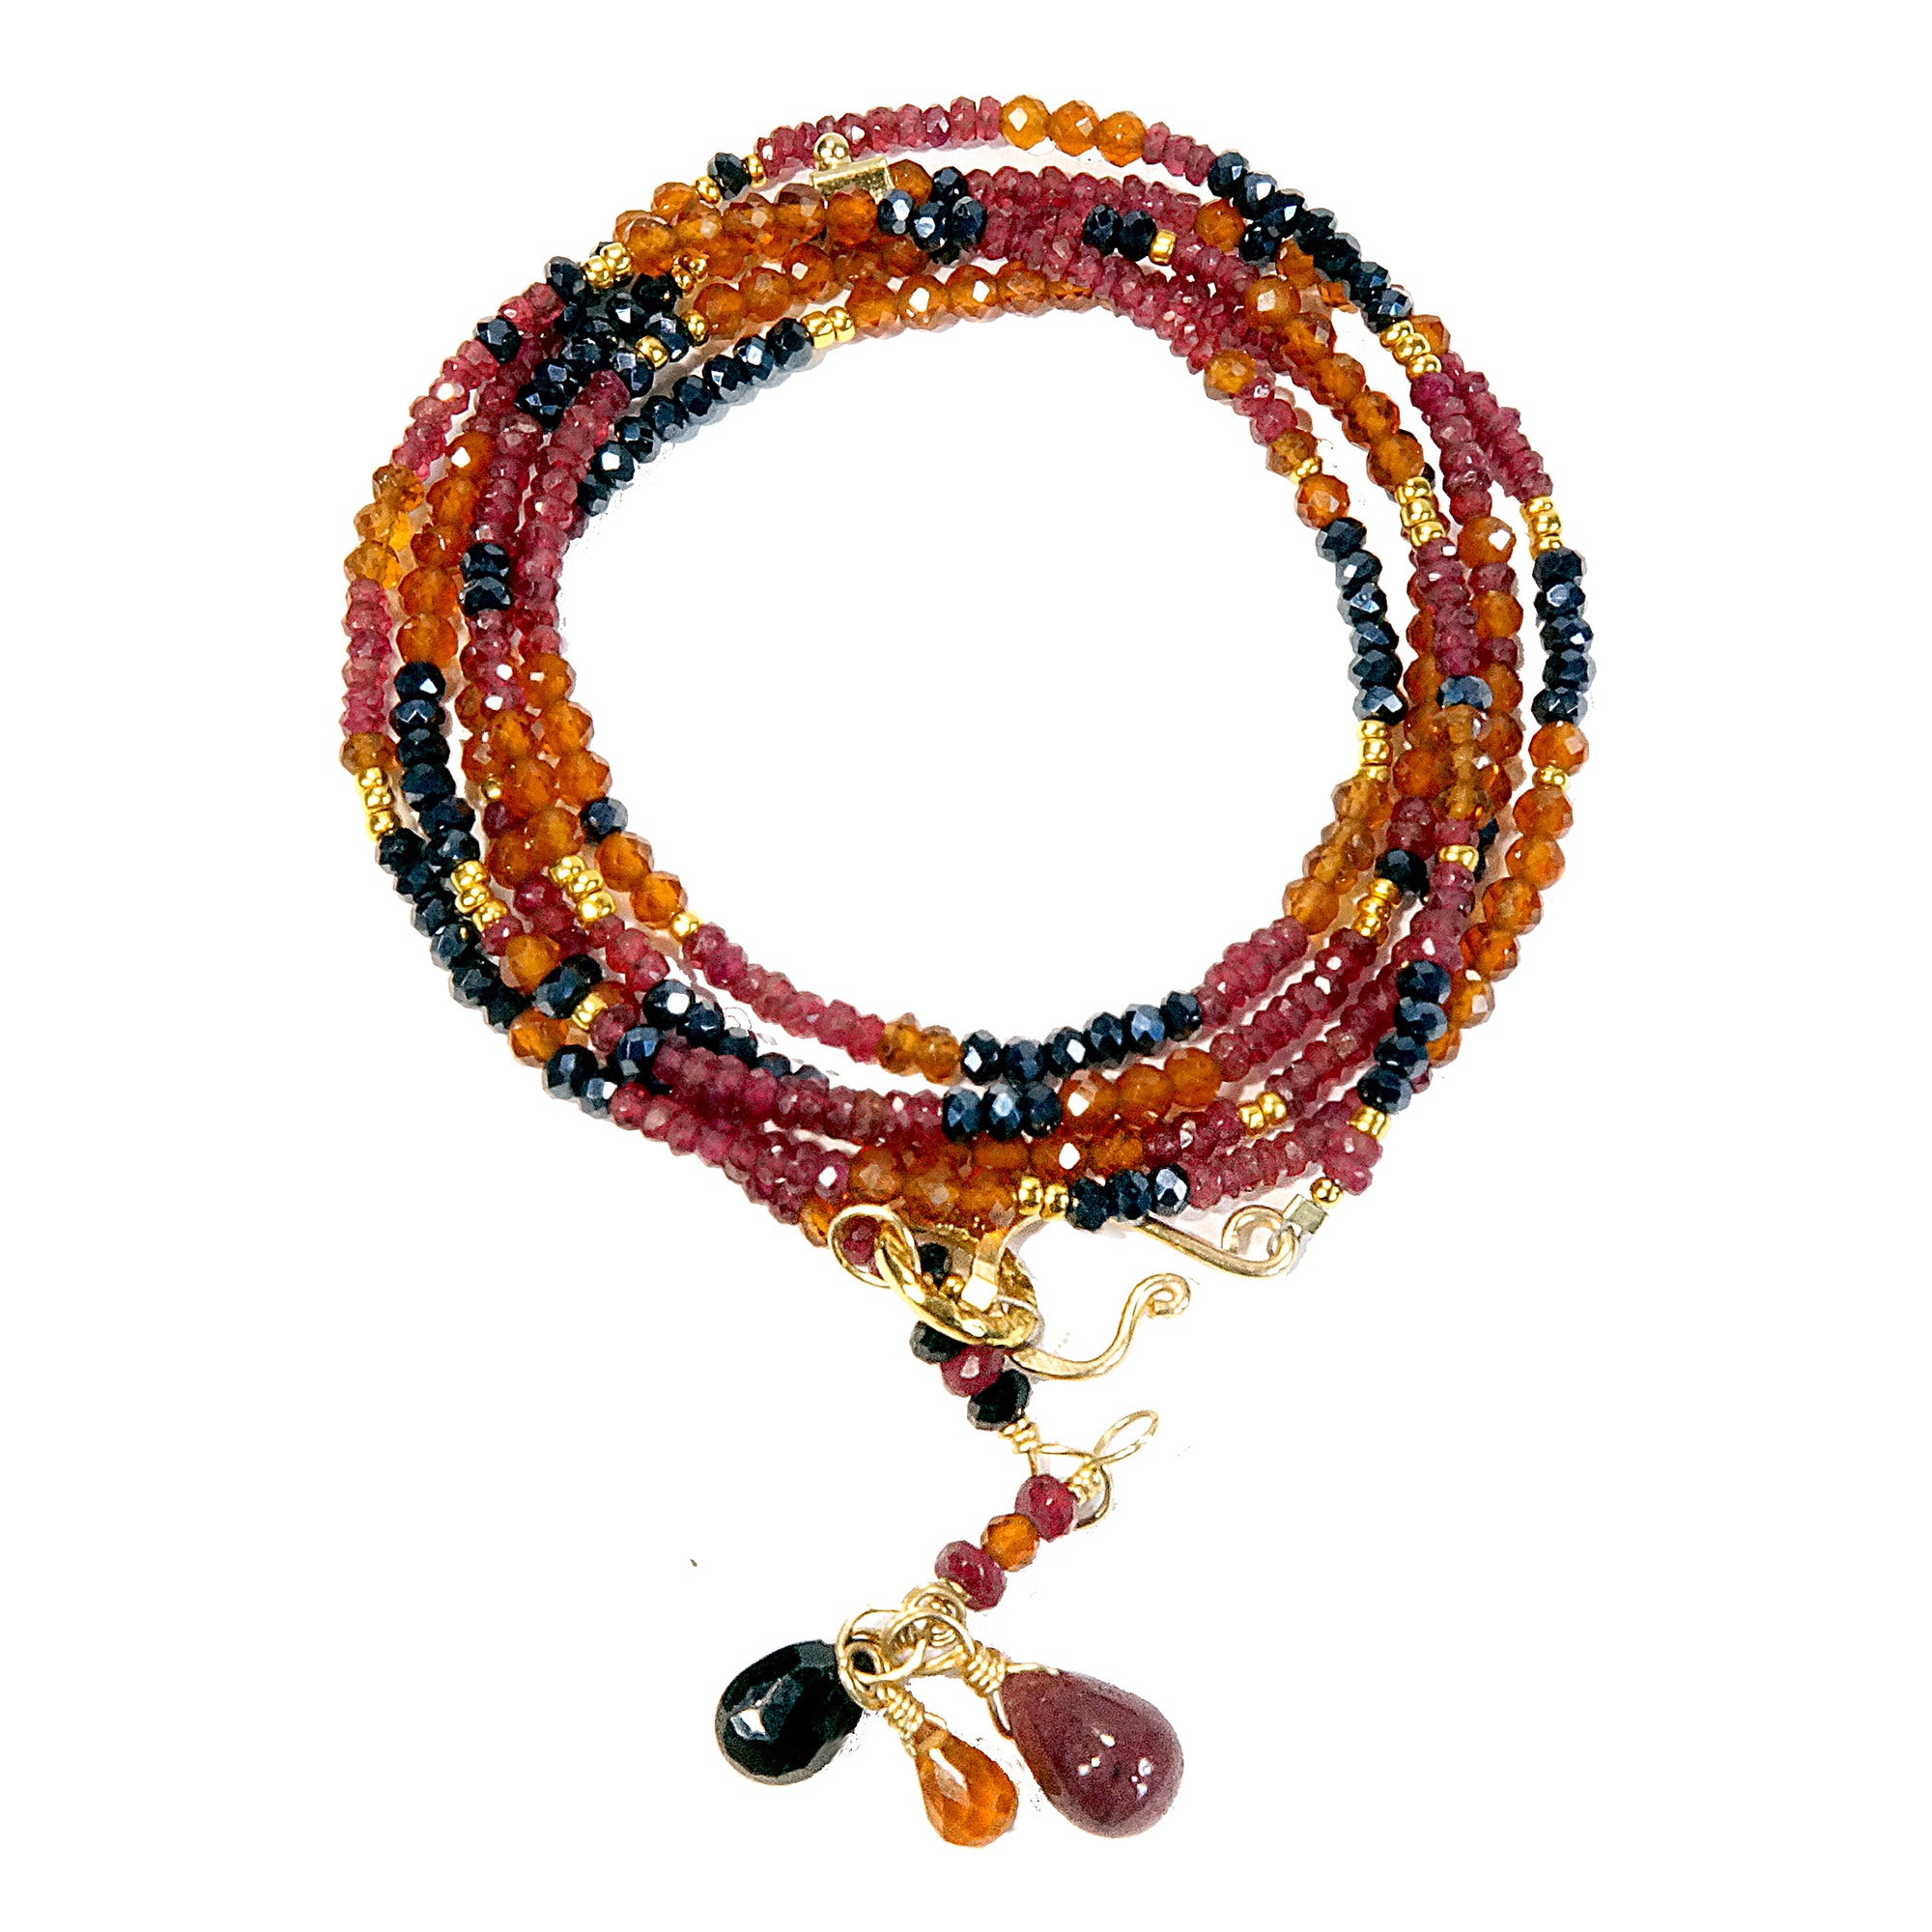 Multi Gemstone Necklace/Wrapped Bracelet with Spinel, Hessonite, Ruby - Long